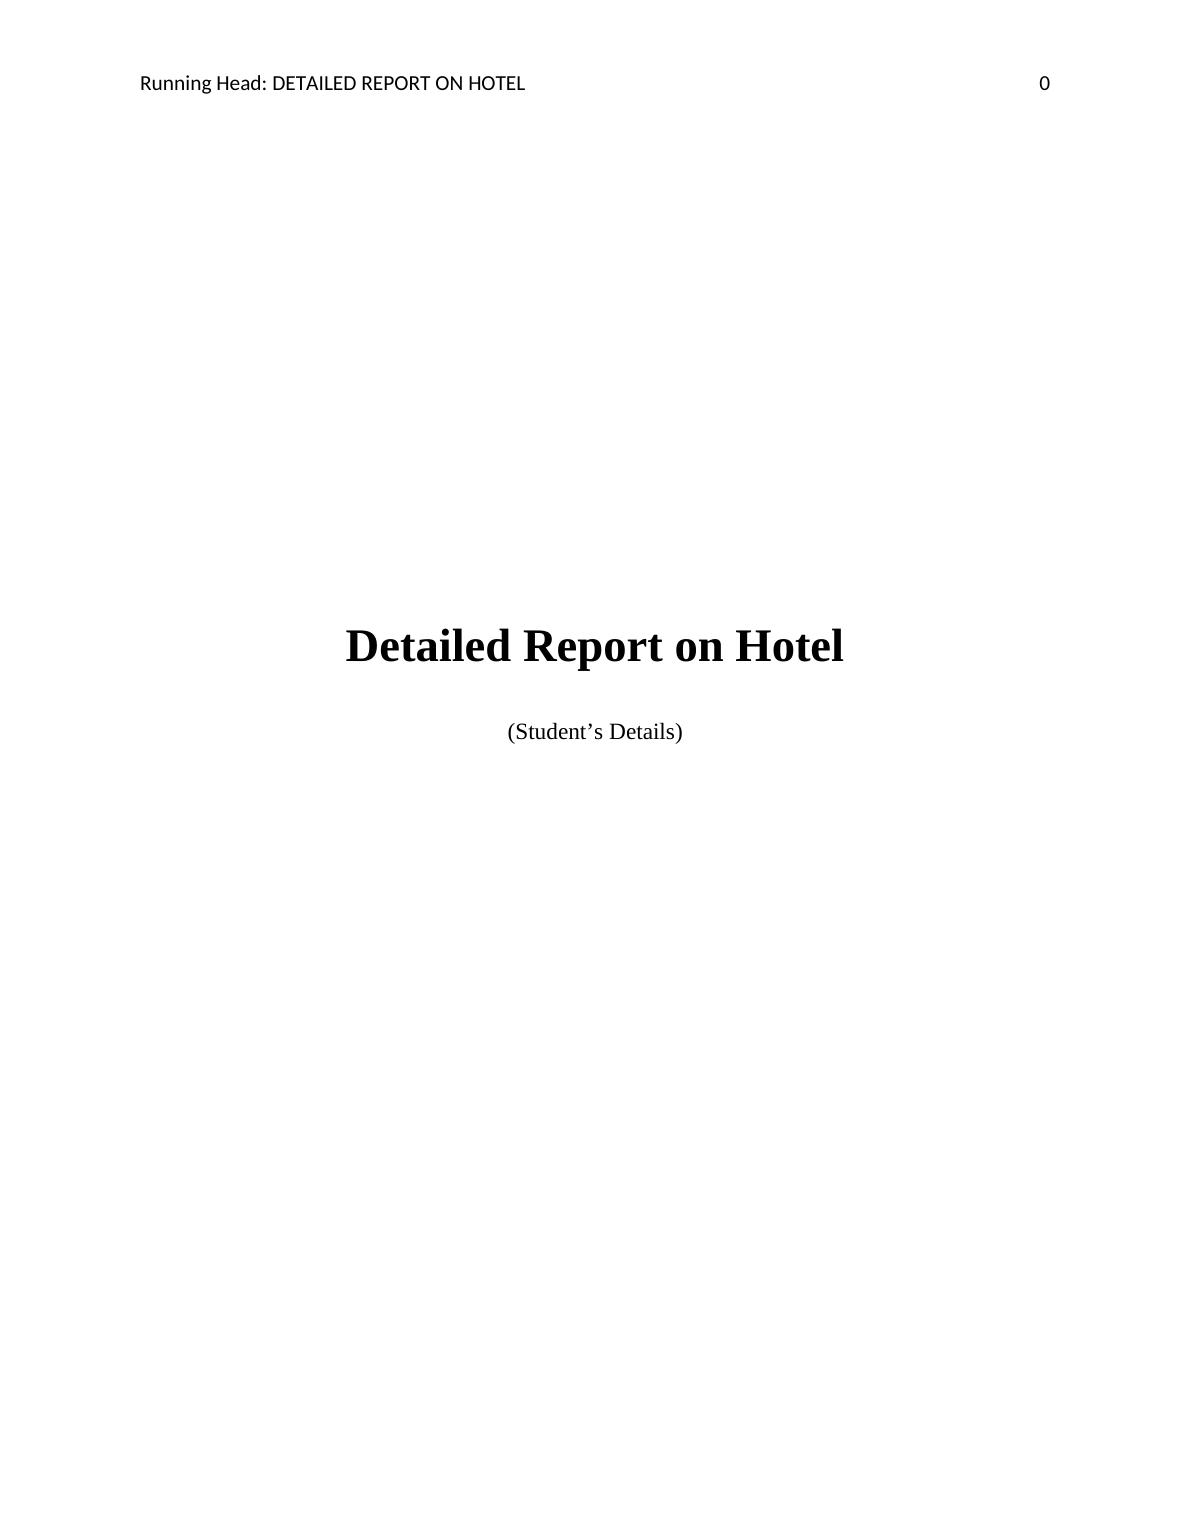 Detailed Report on Hotel Business Plan in Sydney_1